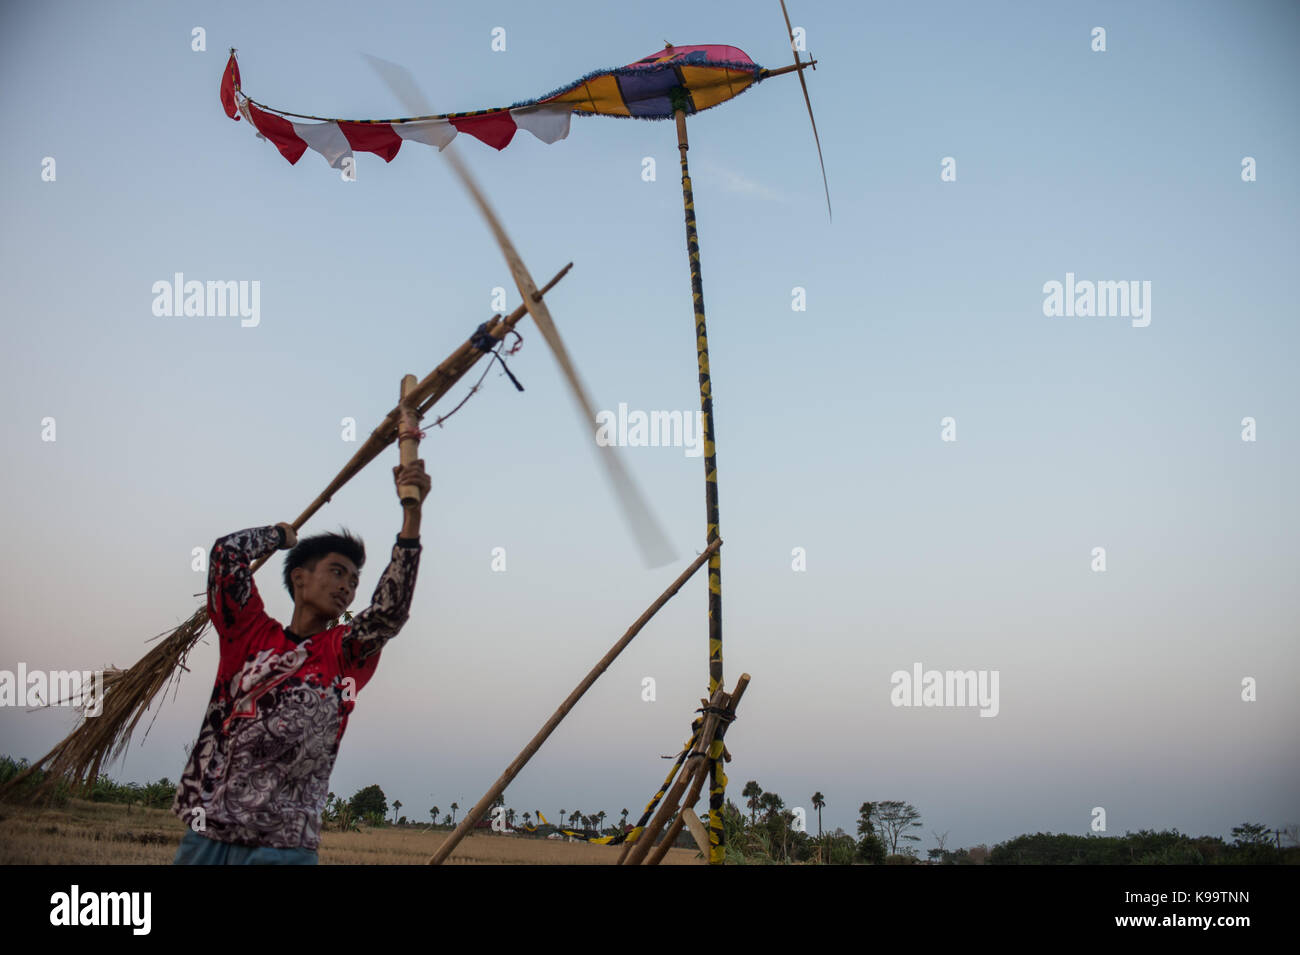 Pandeglang, Indonesia. 22nd Sep, 2017. A man tests his windmill during traditional windmill festival at Tanjung Lesung, Pandeglang district, Banten Province in Indonesia, Sept. 22, 2017. Credit: Veri Sanovri) (zjy/Xinhua/Alamy Live News Stock Photo